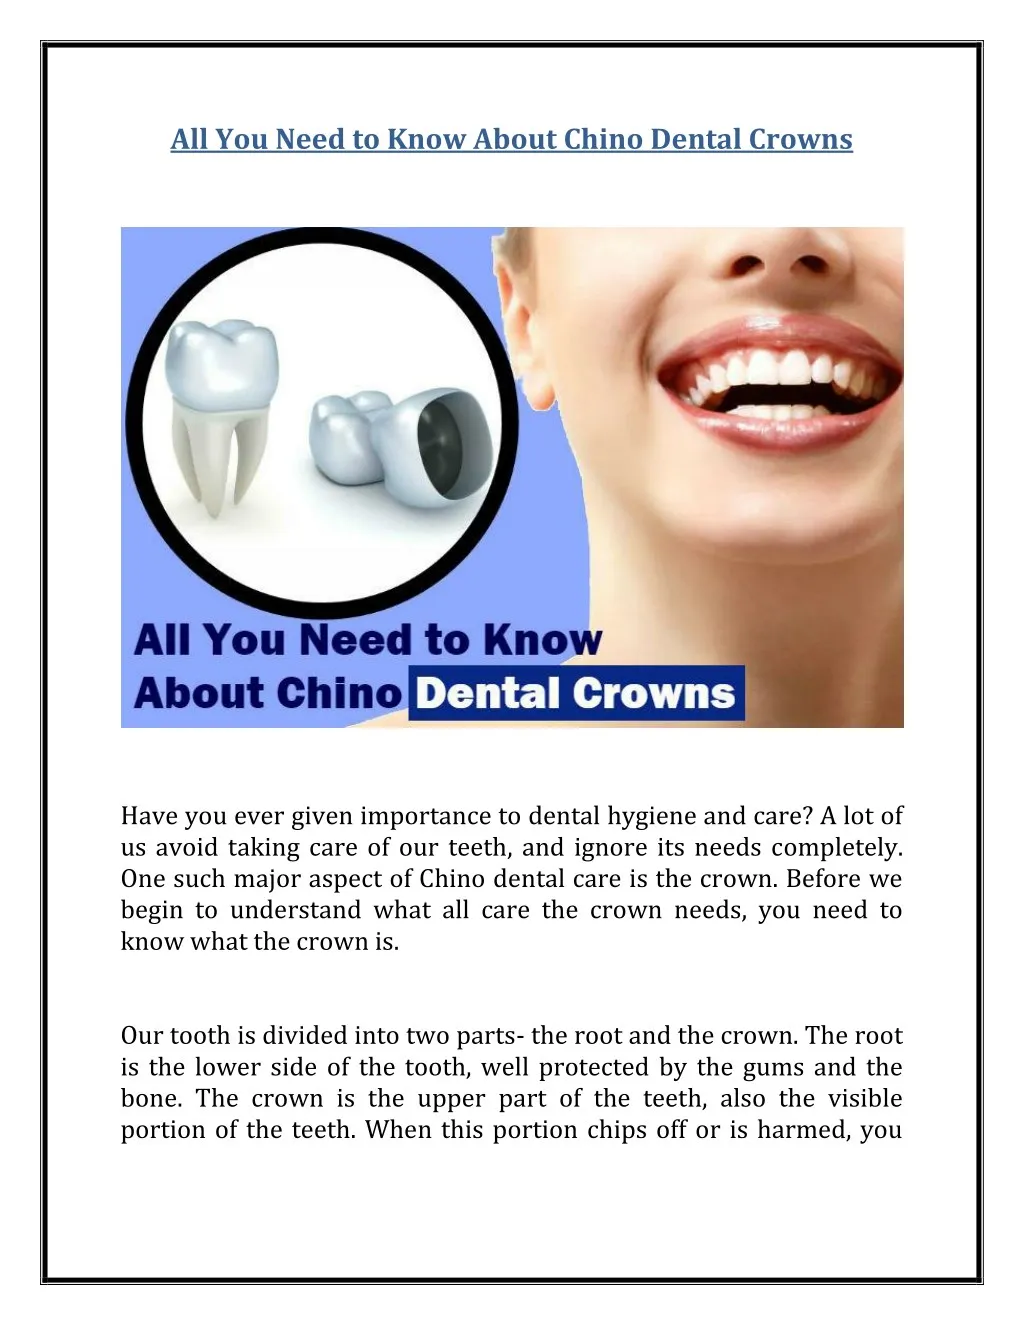 all you need to know about chino dental crowns